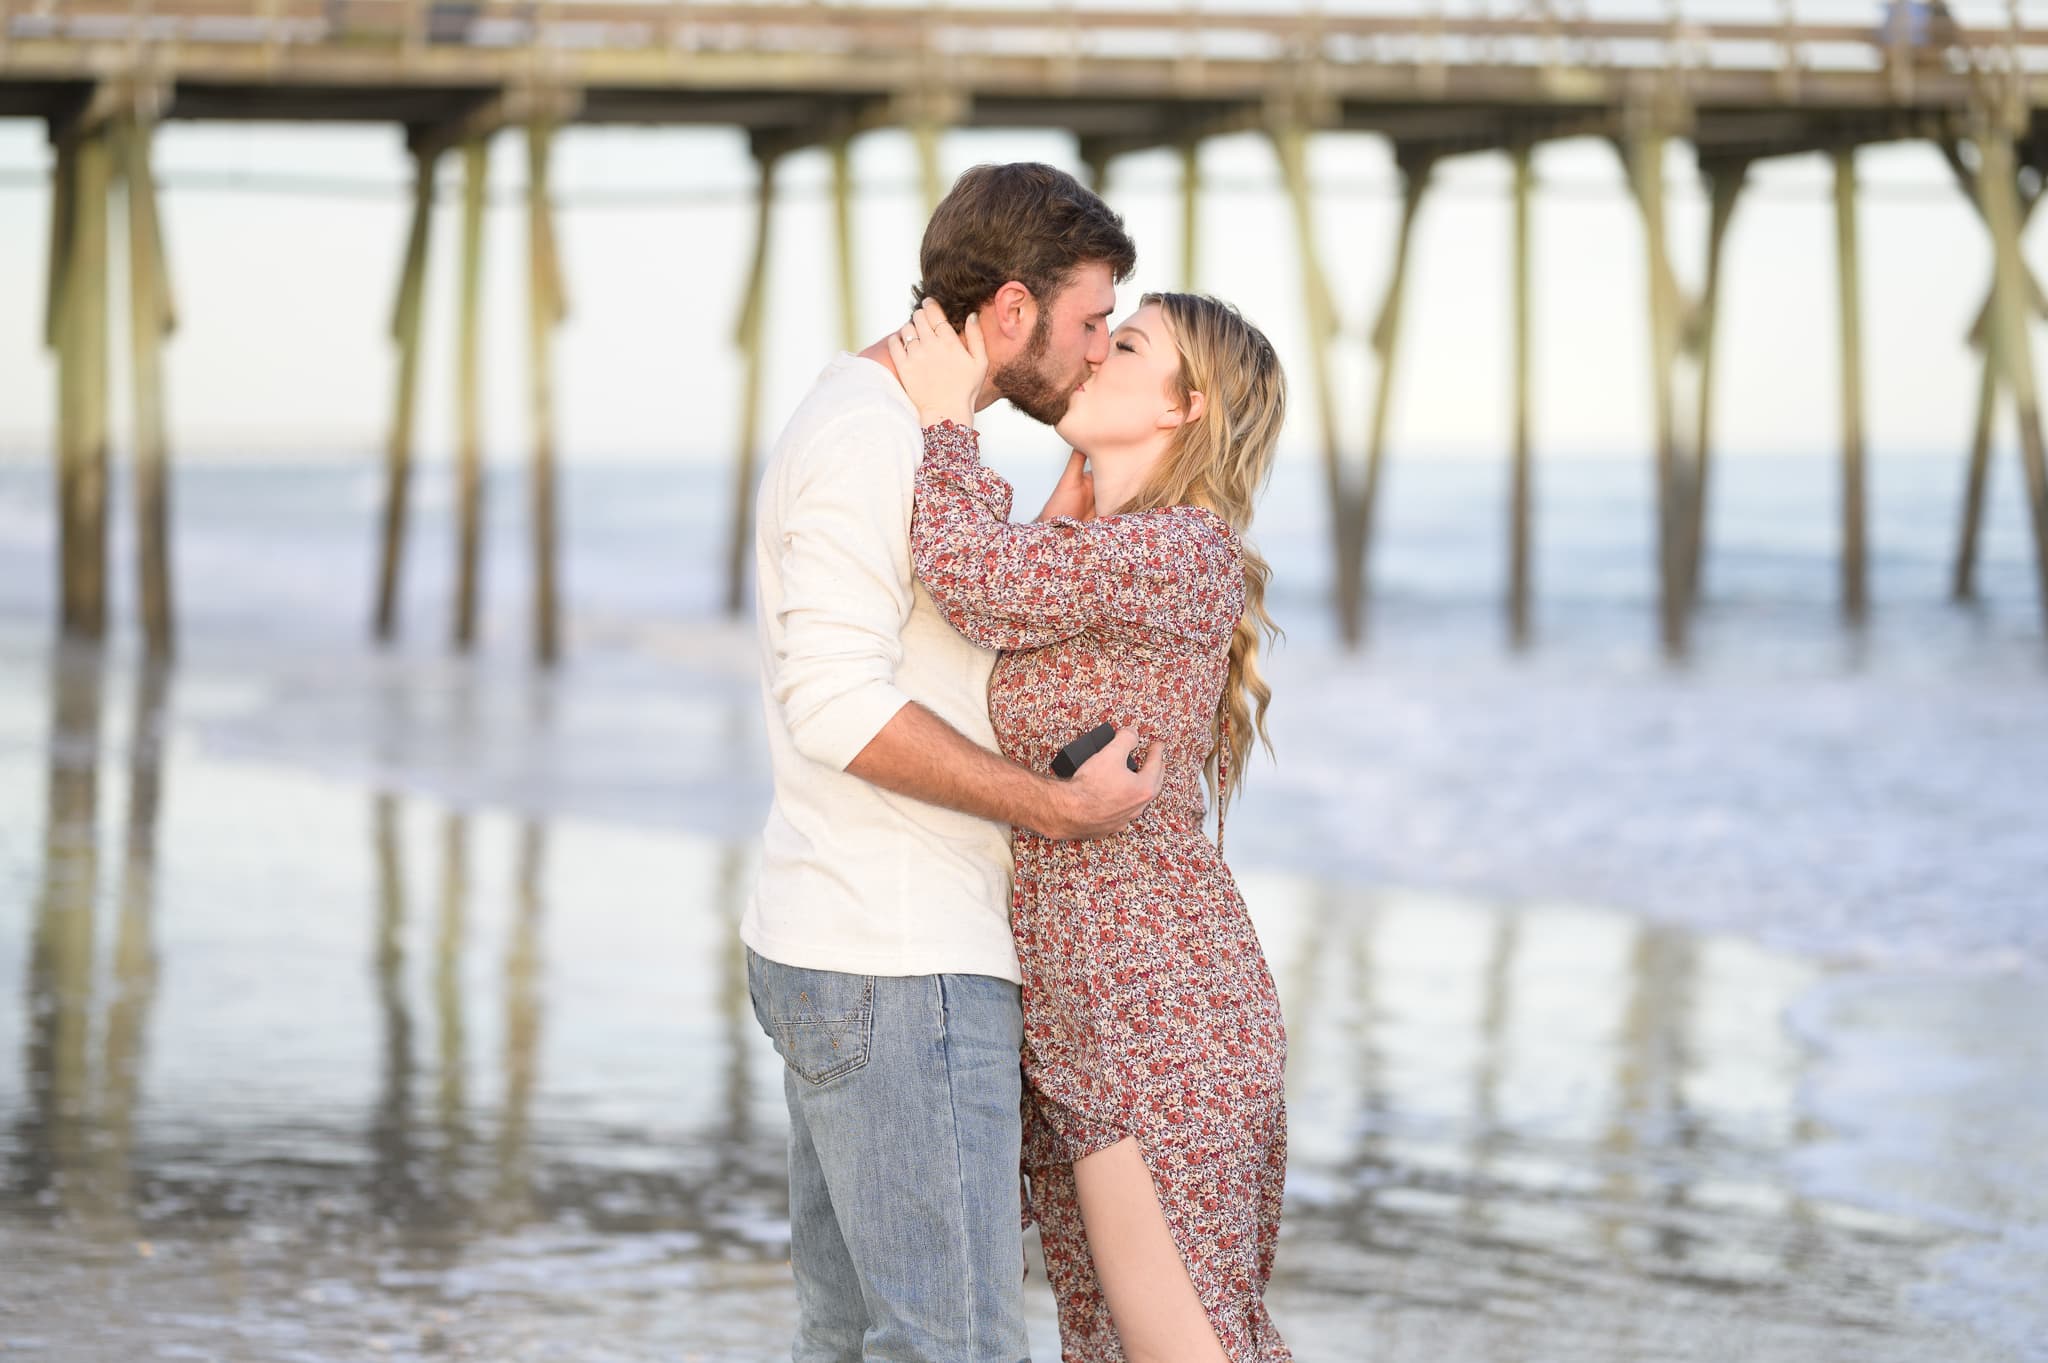 Kiss after the proposal - Myrtle Beach State Park